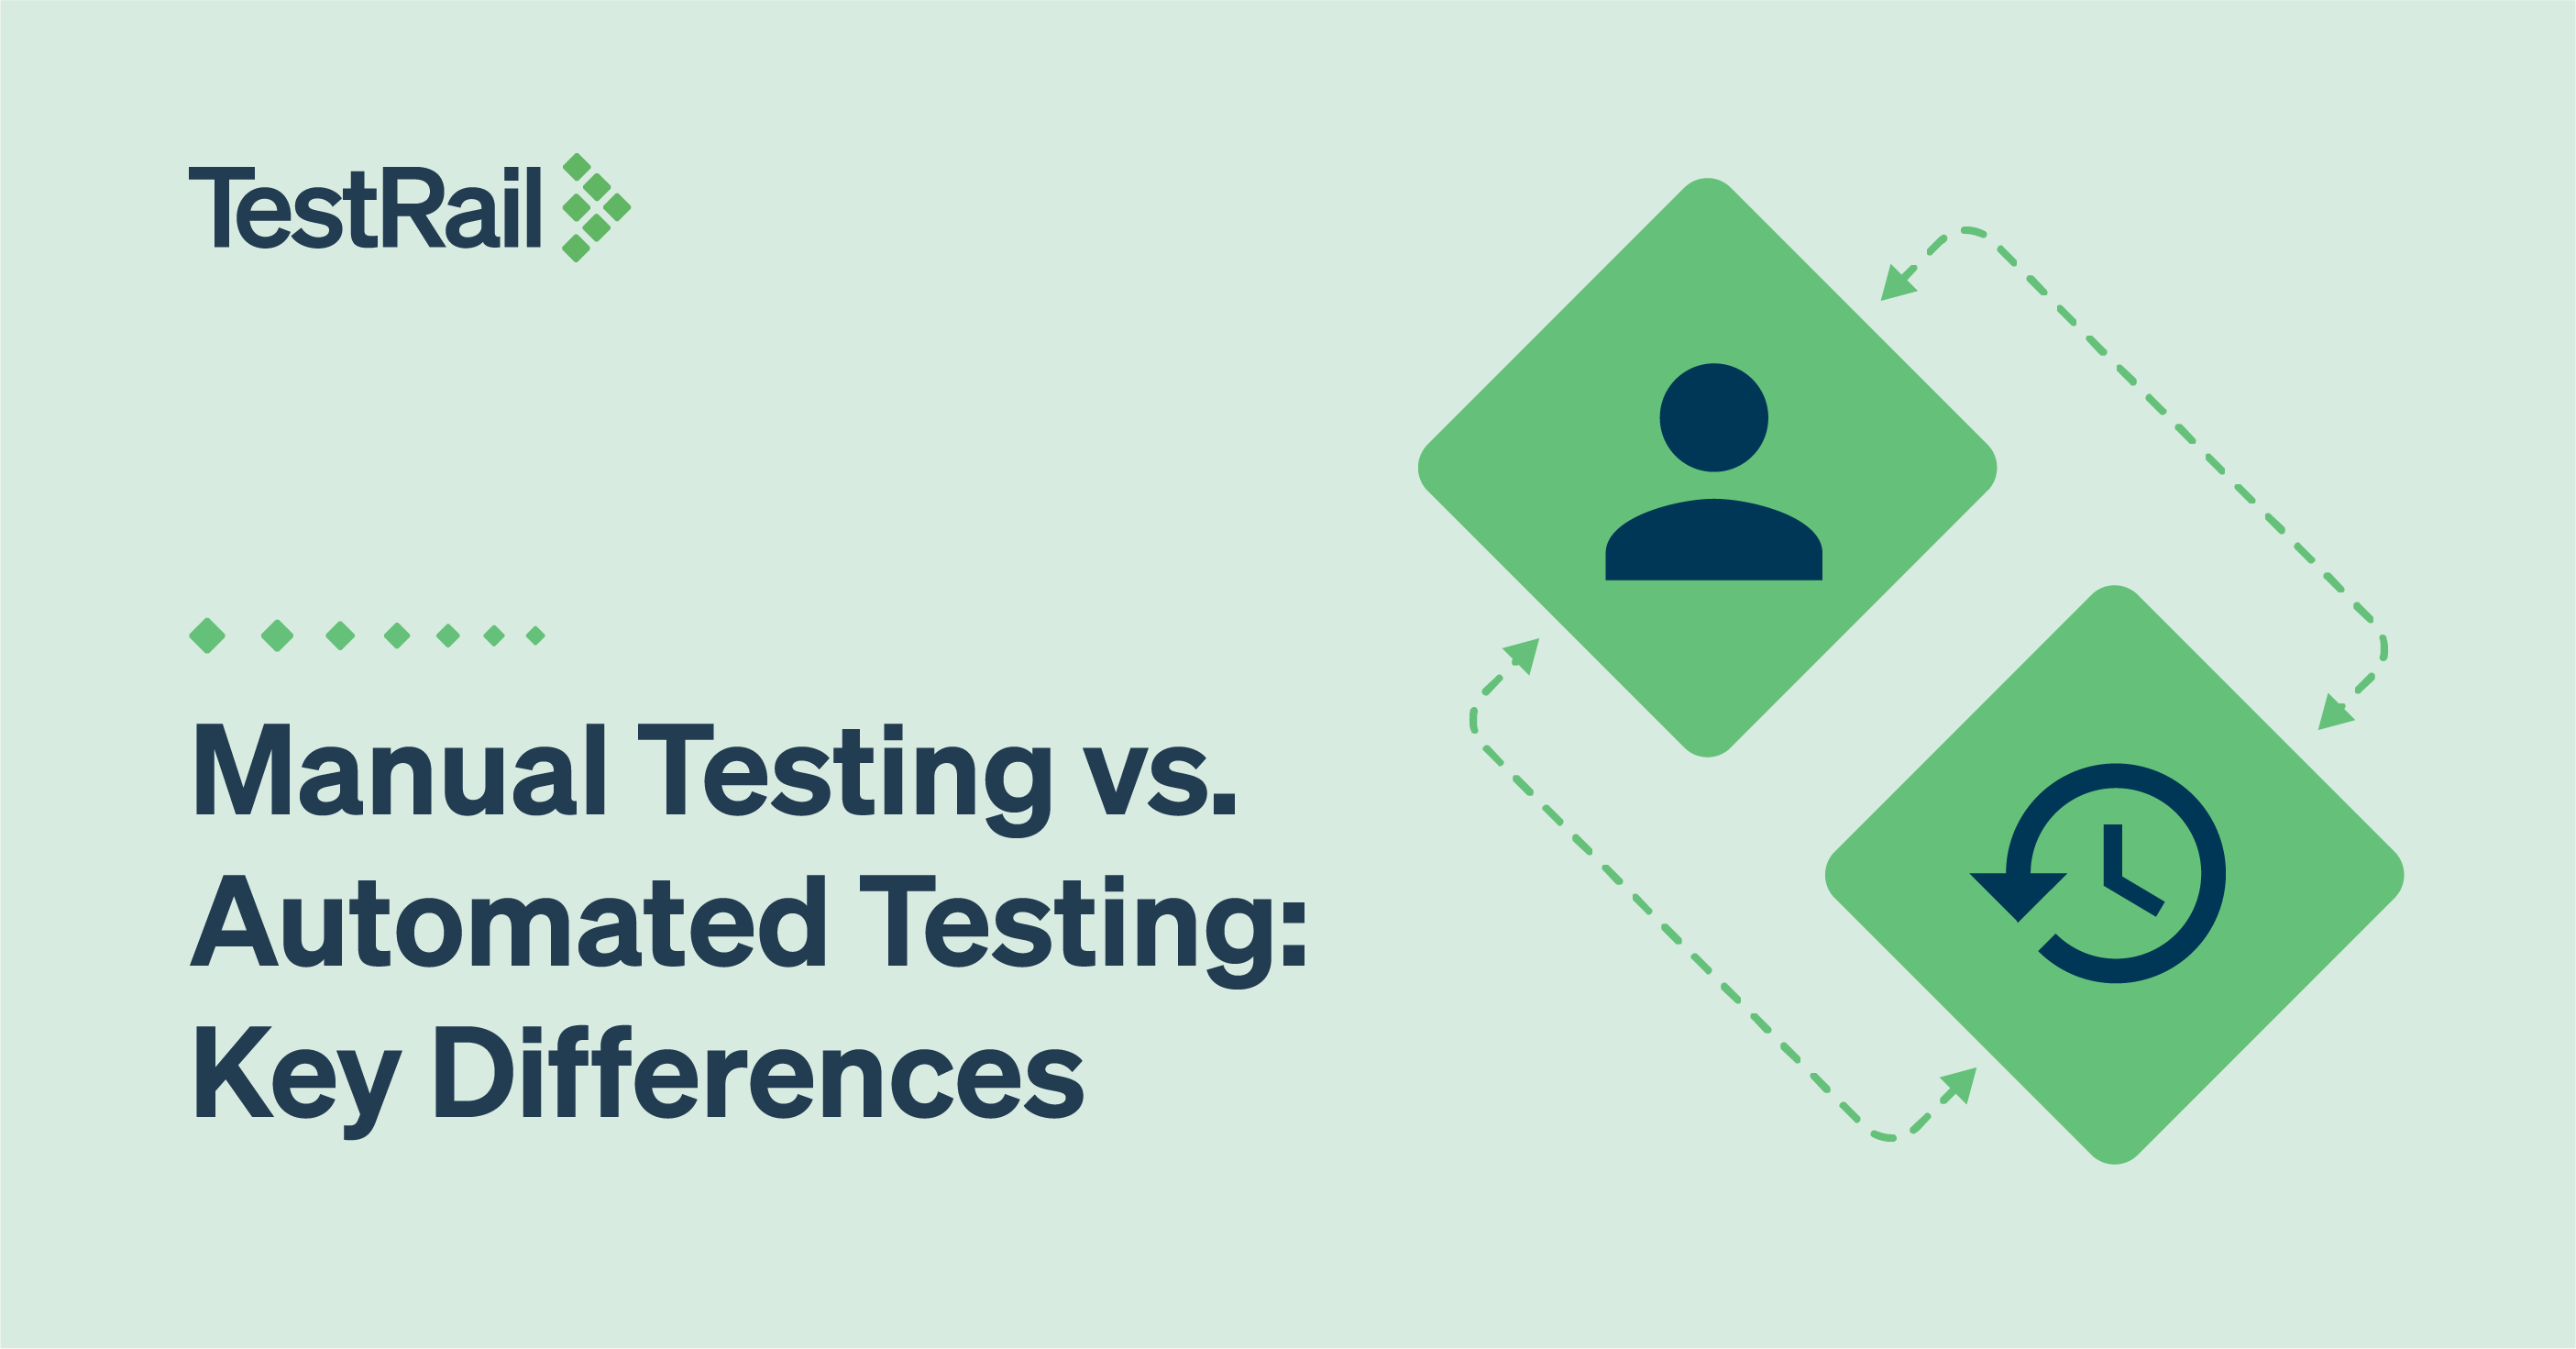 Manual Testing vs Automated Testing: Key Differences